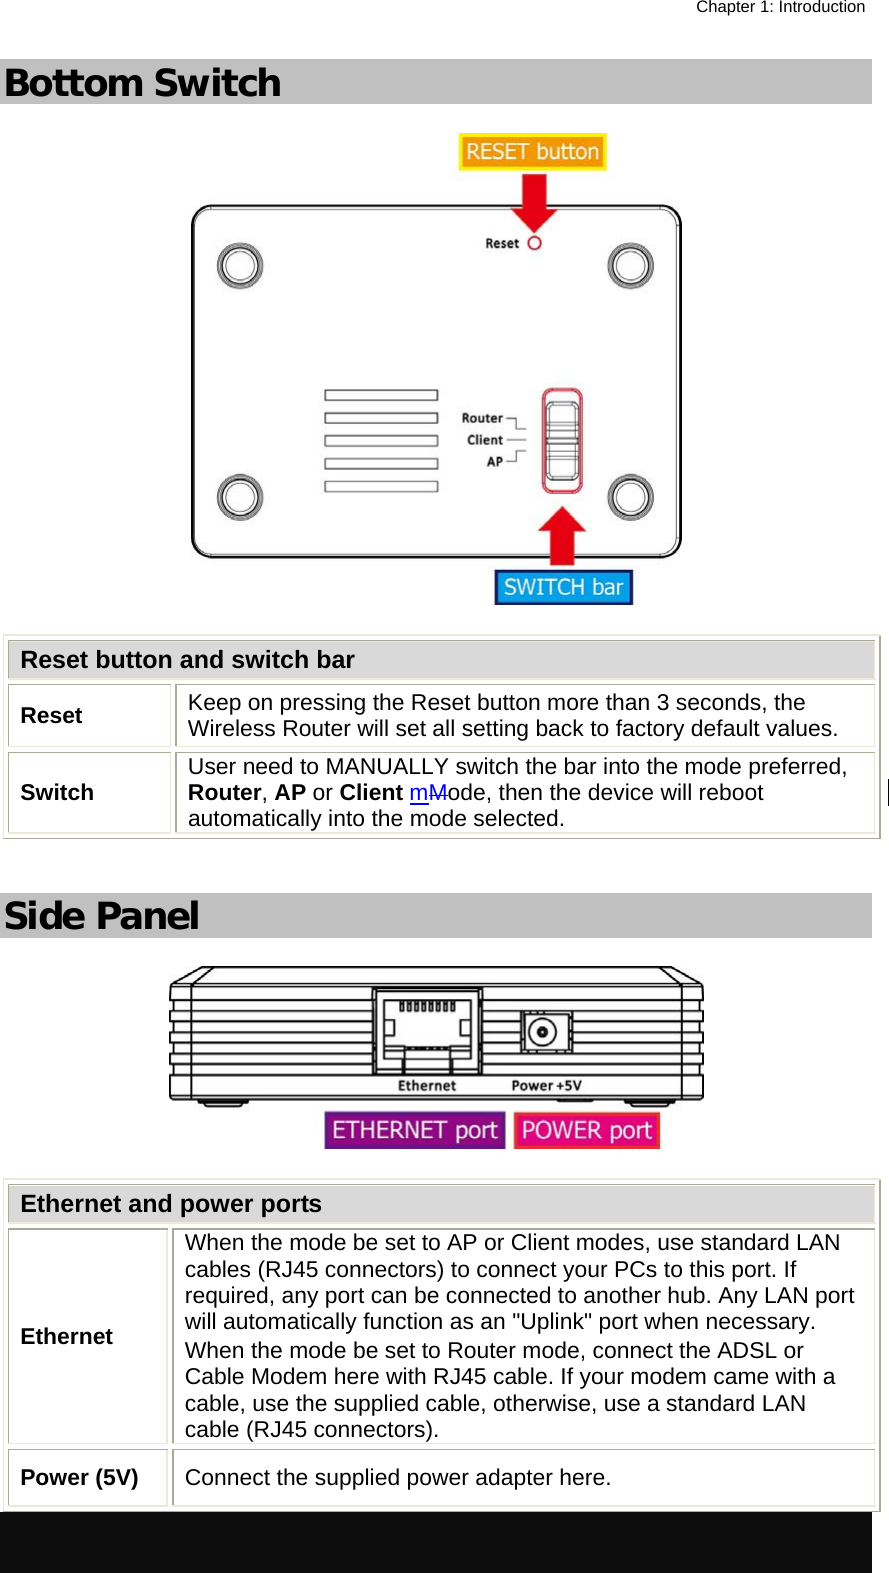   Chapter 1: Introduction  5Bottom Switch  Reset button and switch bar Reset   Keep on pressing the Reset button more than 3 seconds, the Wireless Router will set all setting back to factory default values. Switch  User need to MANUALLY switch the bar into the mode preferred, Router, AP or Client mMode, then the device will reboot automatically into the mode selected.   Side Panel  Ethernet and power ports Ethernet  When the mode be set to AP or Client modes, use standard LAN cables (RJ45 connectors) to connect your PCs to this port. If required, any port can be connected to another hub. Any LAN port will automatically function as an &quot;Uplink&quot; port when necessary. When the mode be set to Router mode, connect the ADSL or Cable Modem here with RJ45 cable. If your modem came with a cable, use the supplied cable, otherwise, use a standard LAN cable (RJ45 connectors). Power (5V)  Connect the supplied power adapter here. 